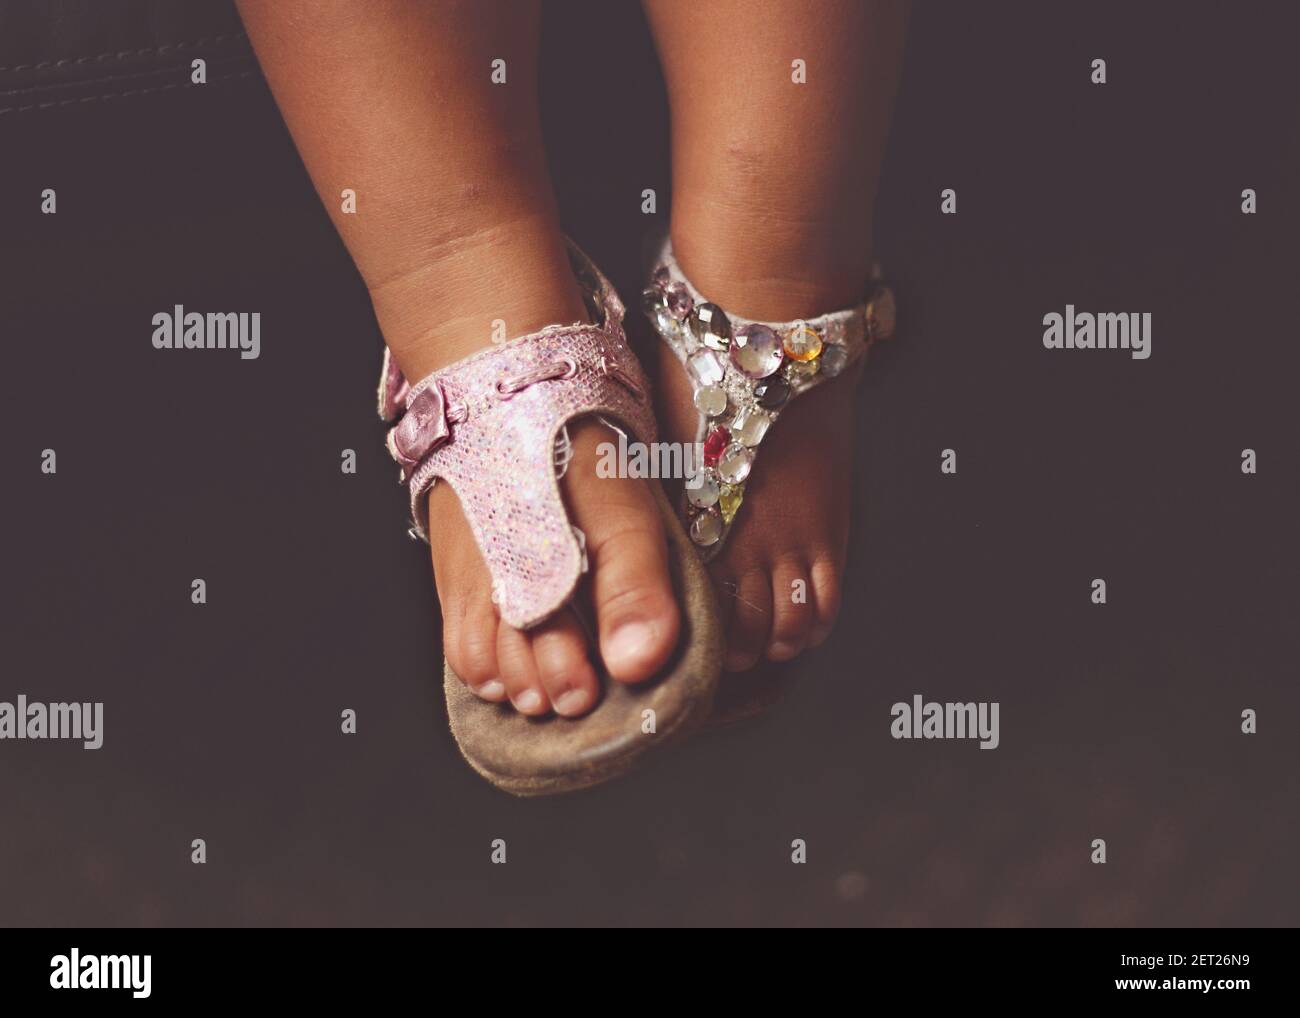 Close-up of a girl's feet wearing Mismatched Sandals Stock Photo